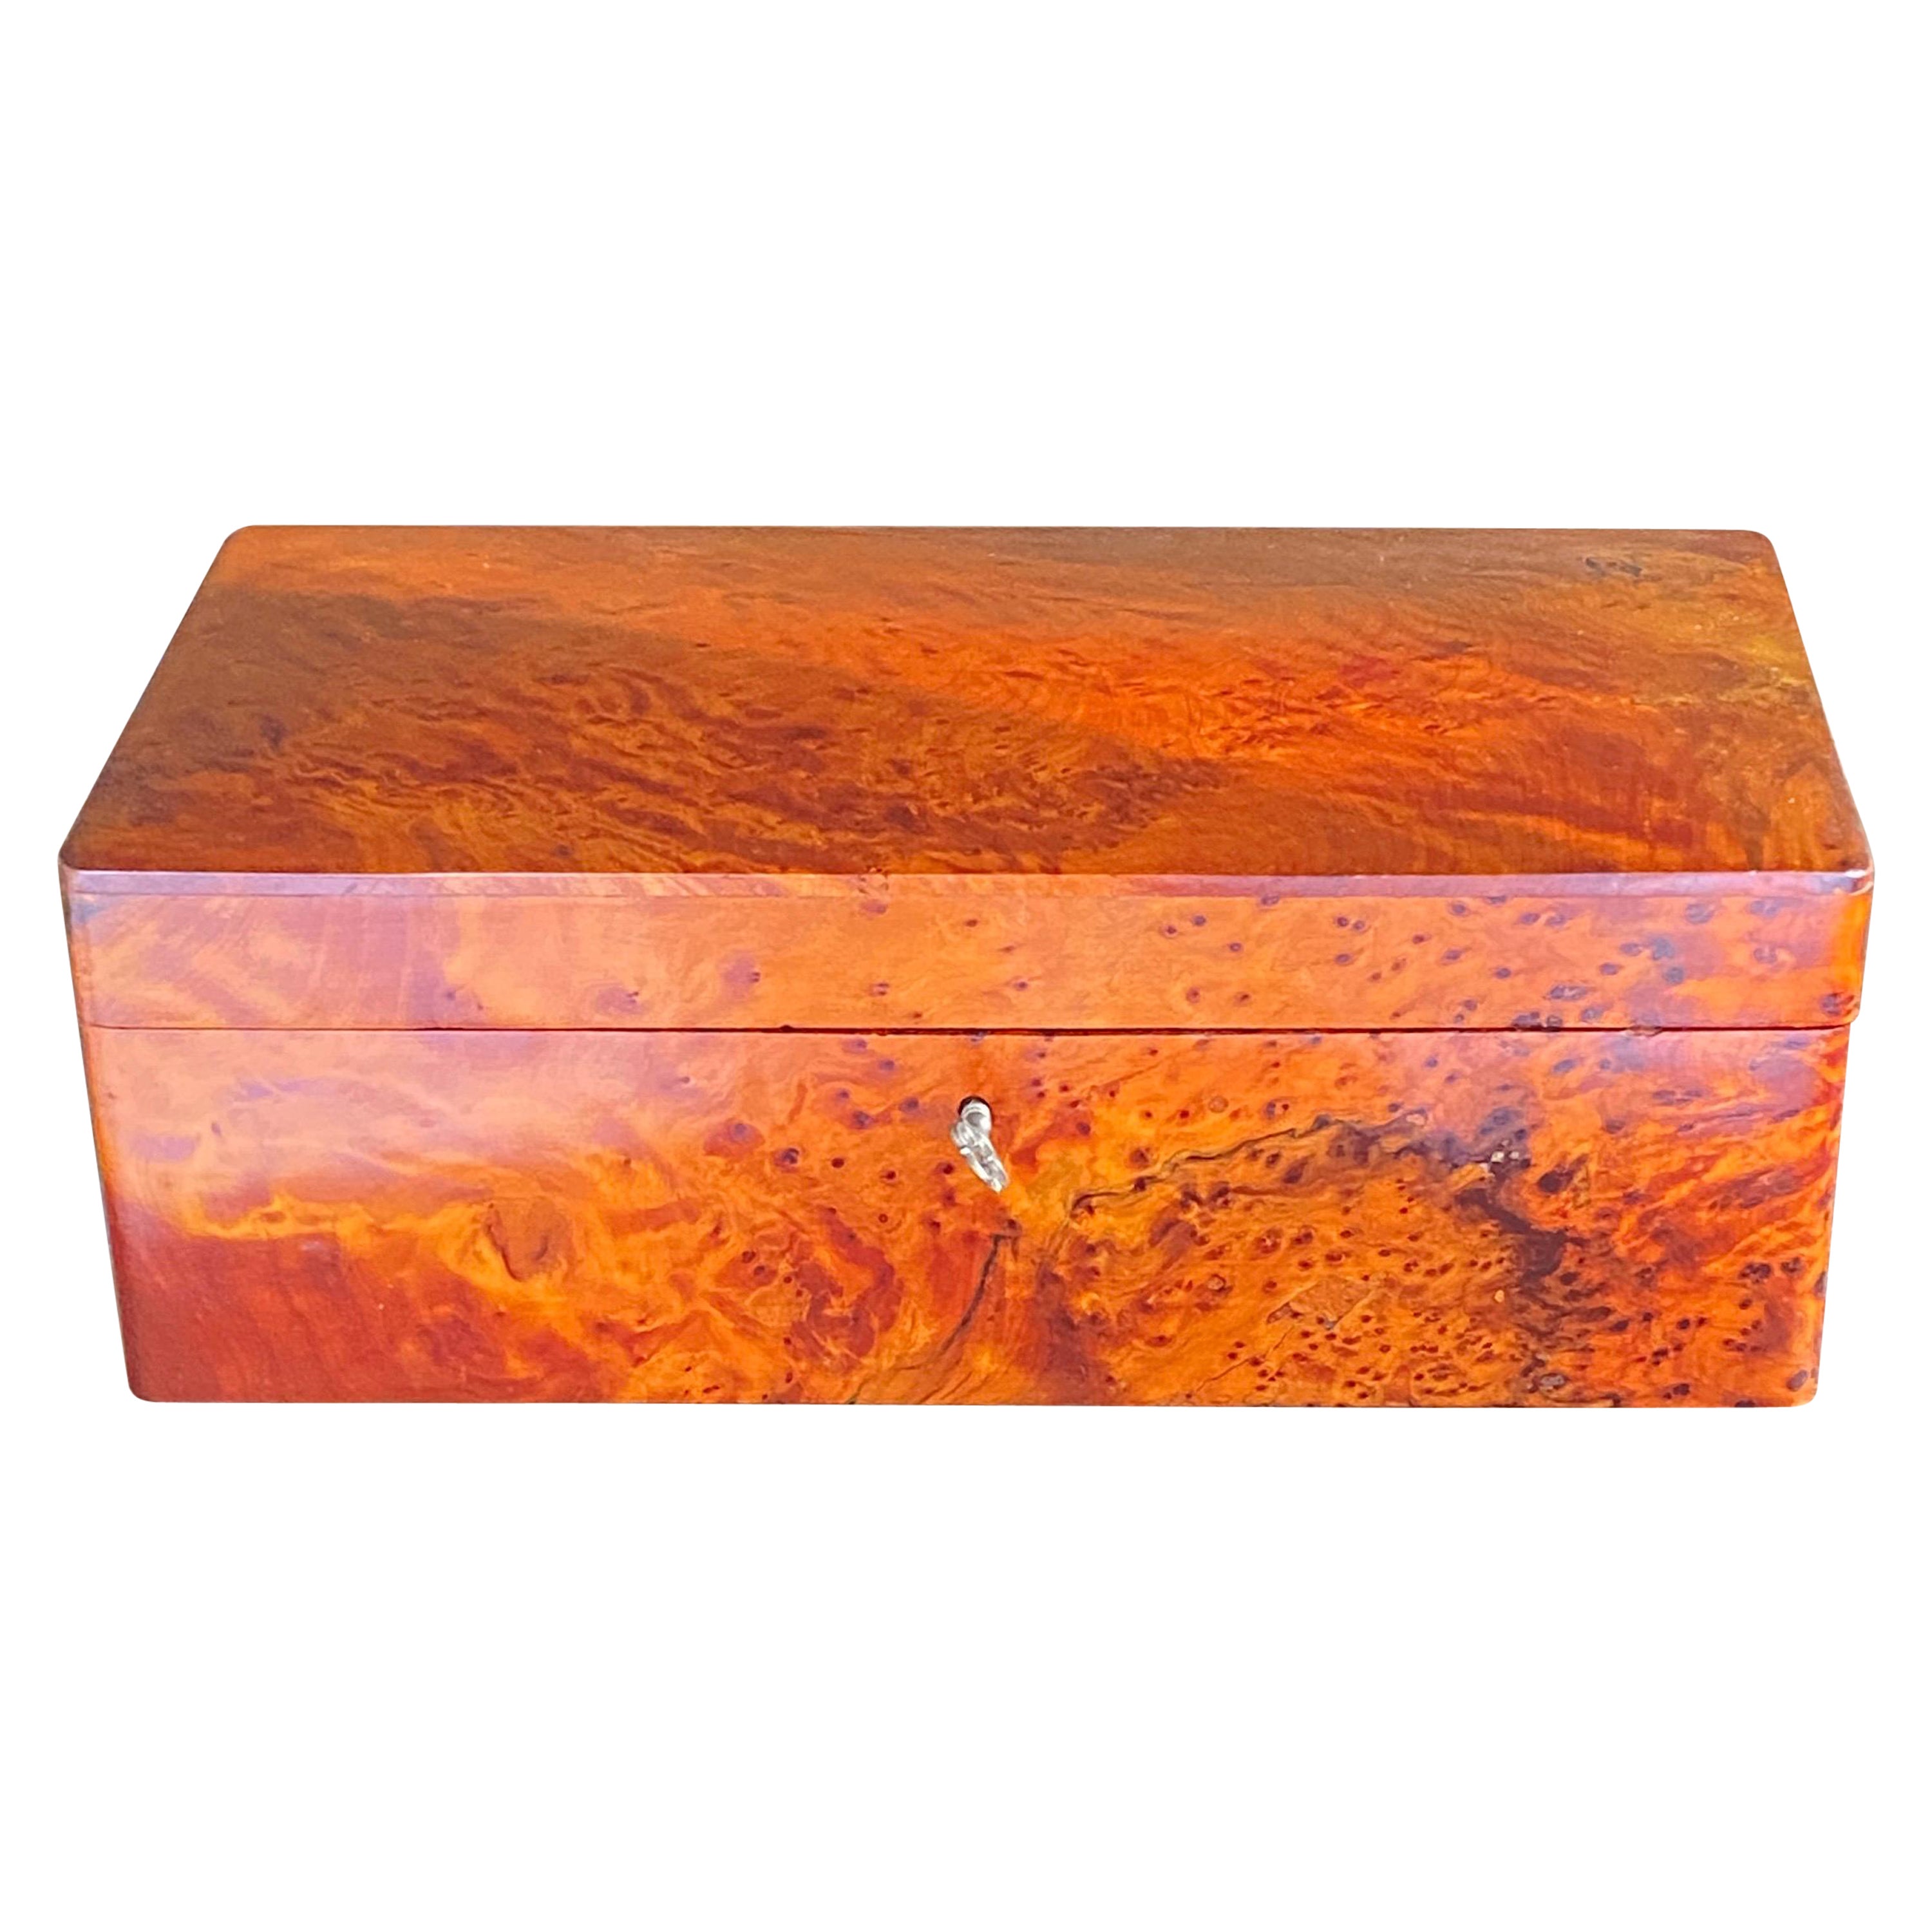 Cigar Box, in Burl Wood, England 1970, Brown Color, with a Second Box Inside